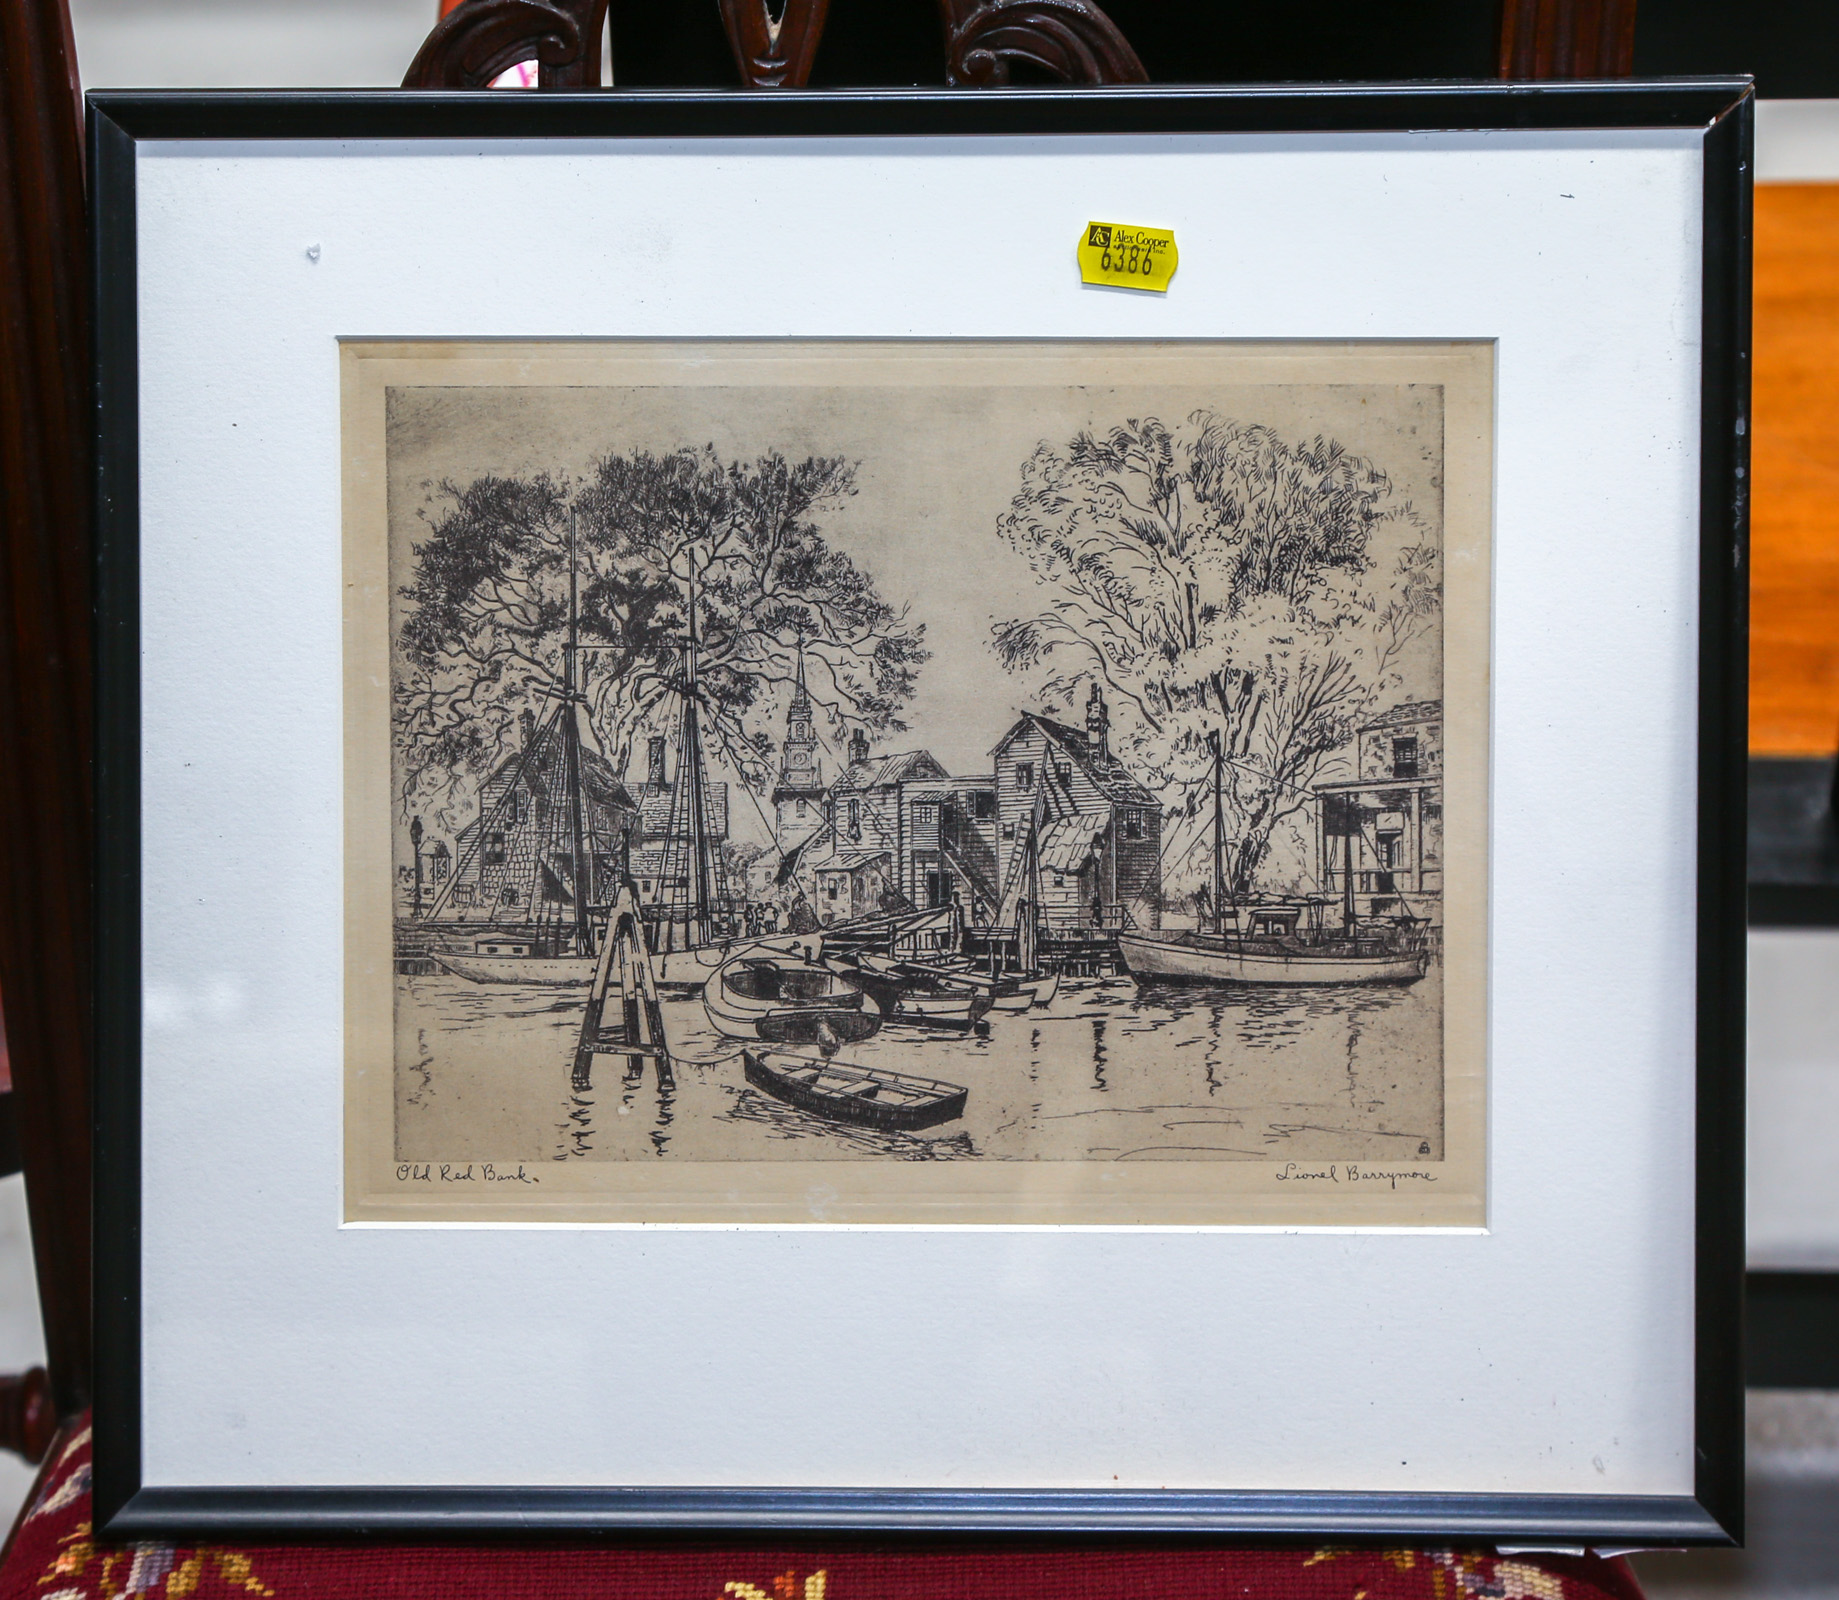 FRAMED PRINT OF WHARF AFTER LIONEL